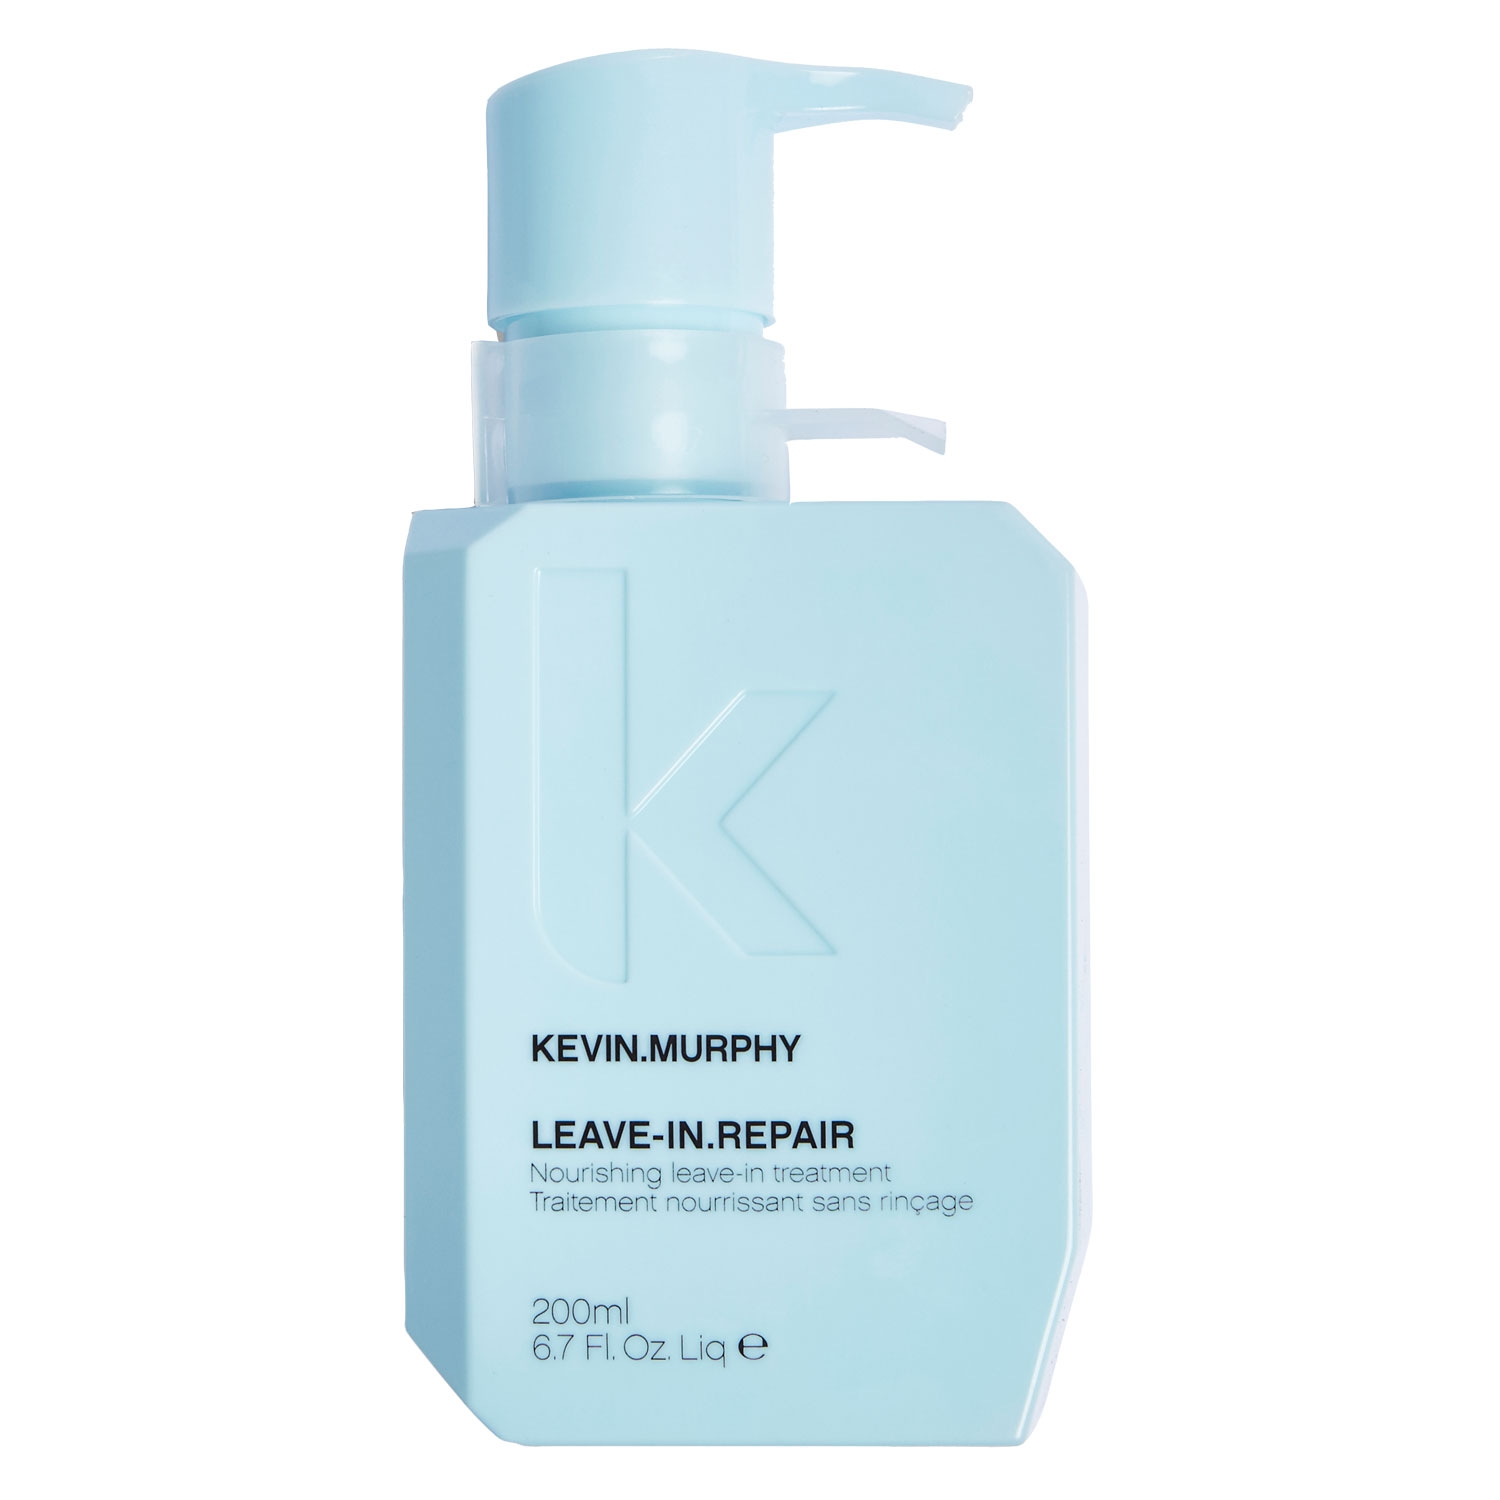 Product image from Leave-In.Repair - Nourishing Leave-in Treatment